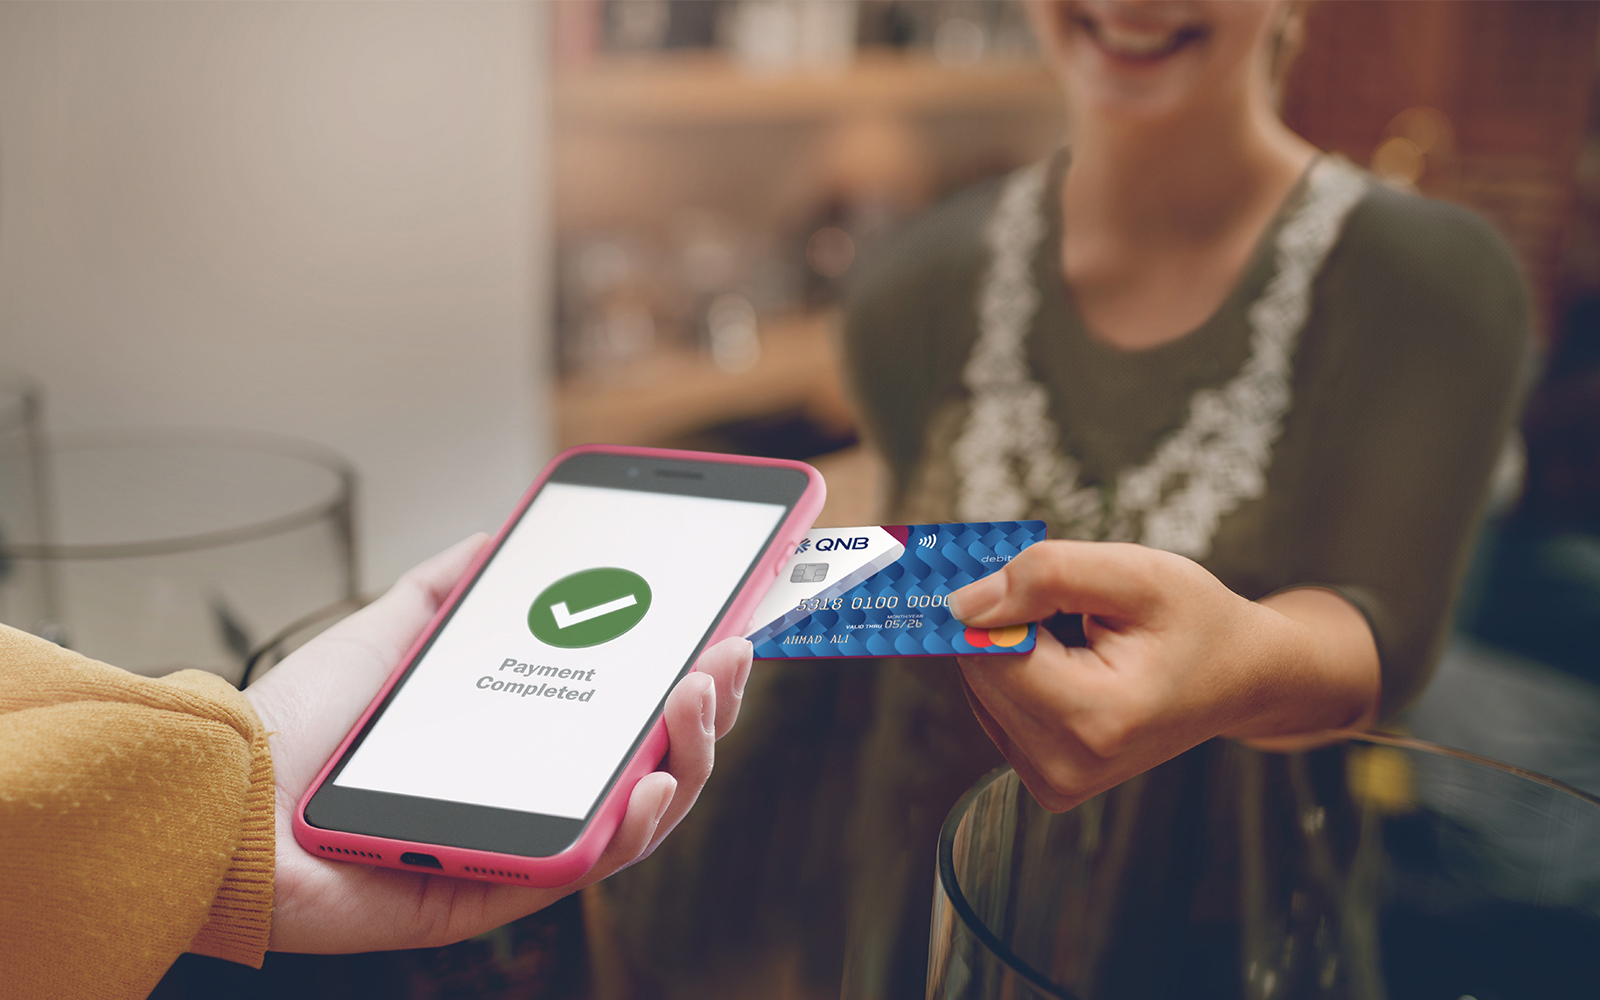 Mastercard and QNB launch “myPOS” tap on phone service for small businesses in Qatar